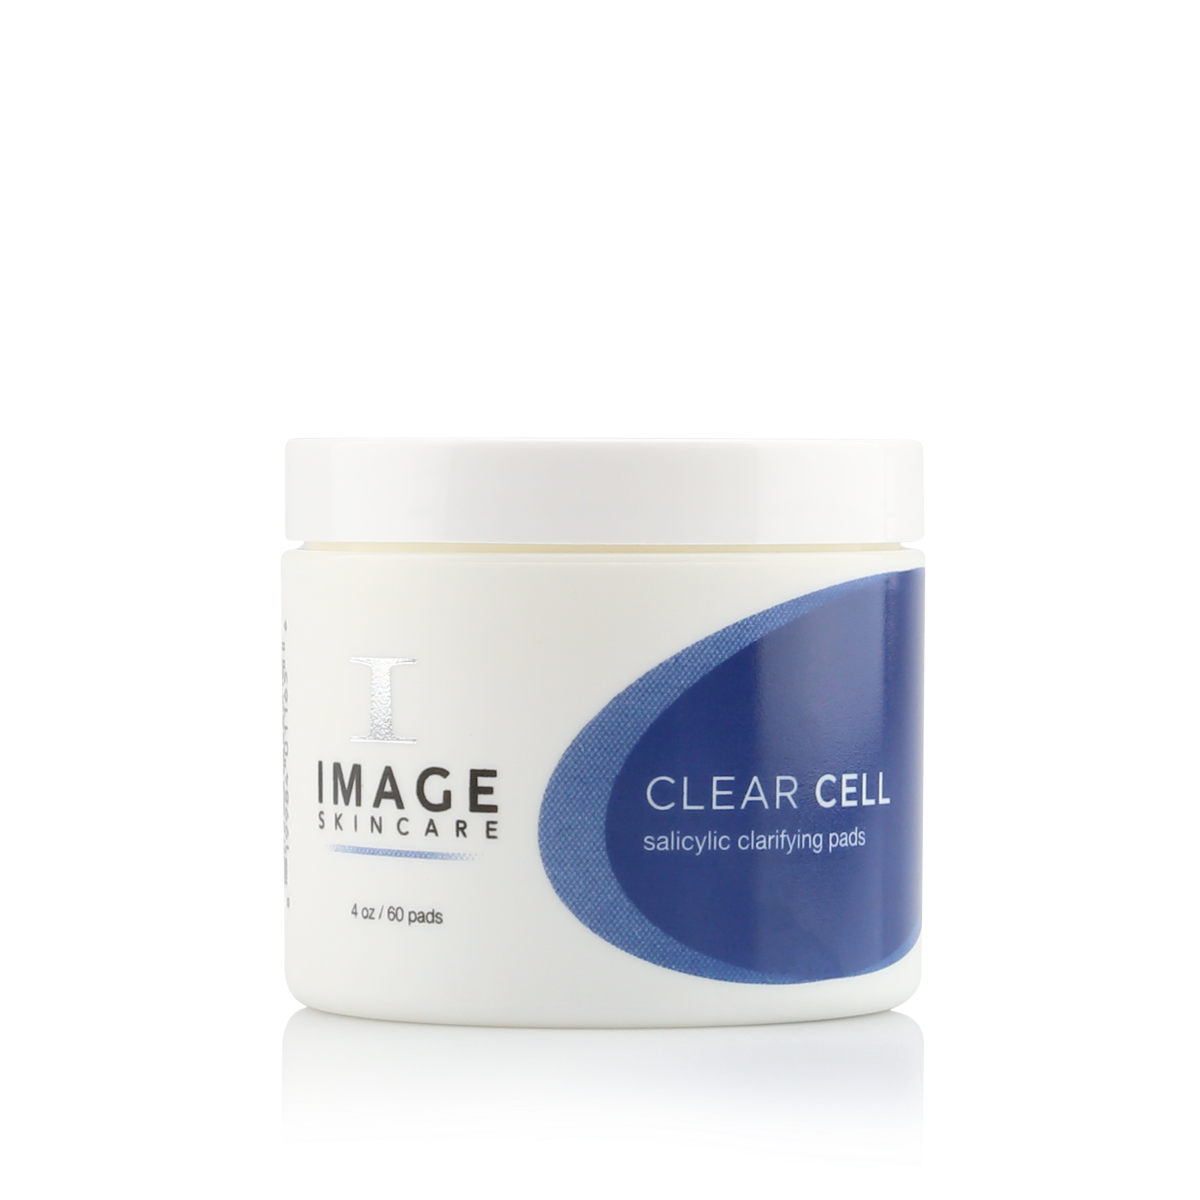 IMAGE SkinCare - CLEAR CELL Salicylic Clarifying Pads - Simple Skincare ...